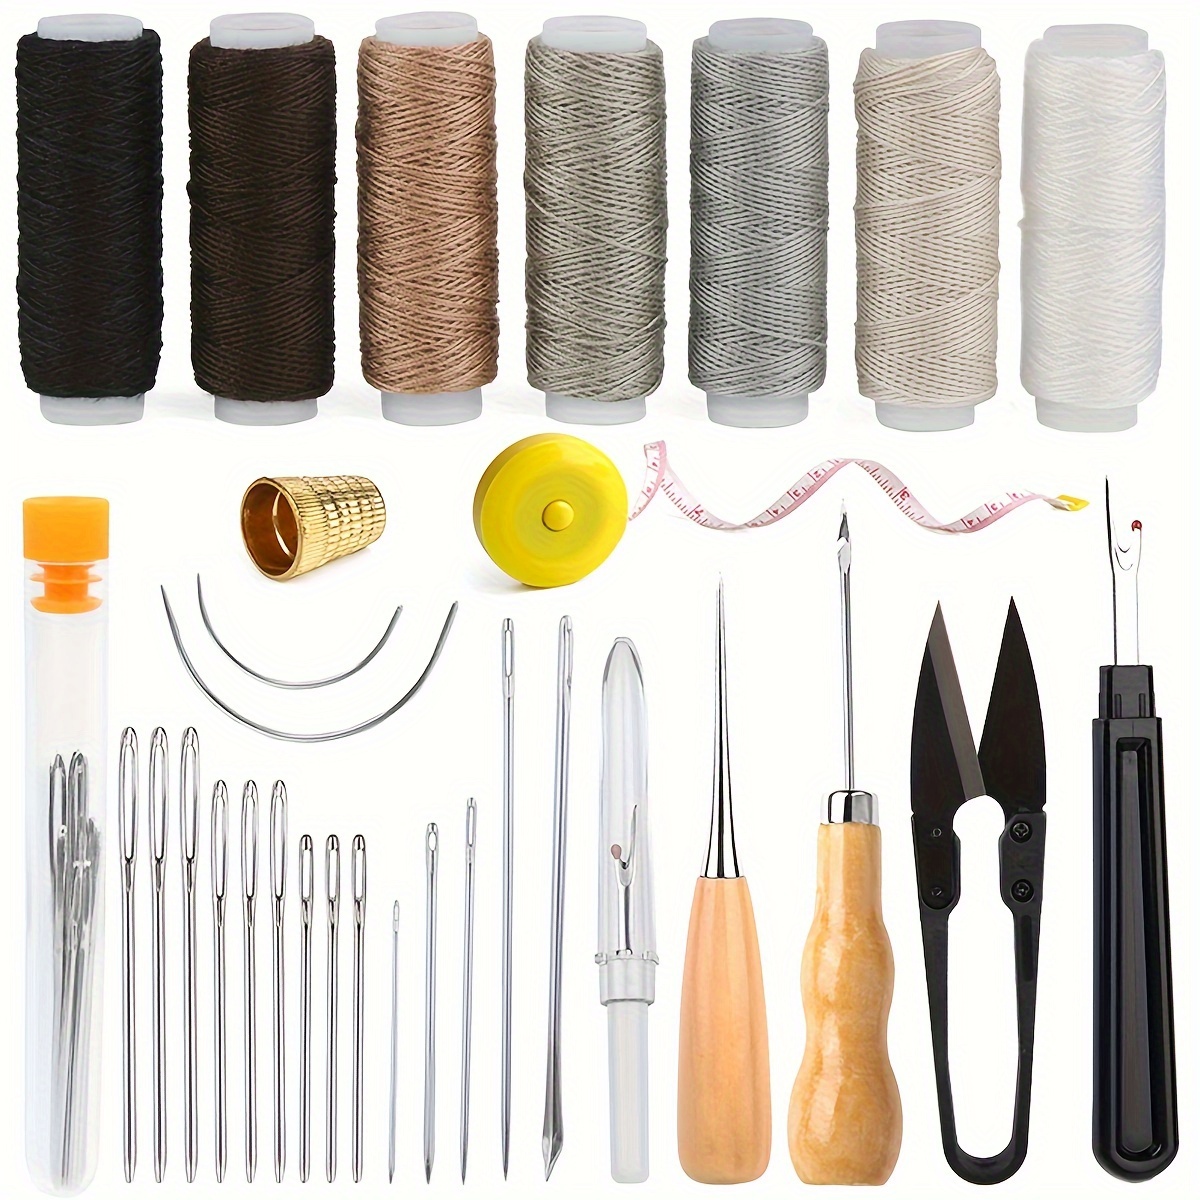 

Leather Craft Tool Kit For Shoes Sofa Tent Carpet Leather Craft Diy, Upholstery Repair Sewing Kit Heavy Duty Sewing Kit With Sewing Awl, Seam Ripper, Hand Sewing Stitching Needles, Sewing Thread